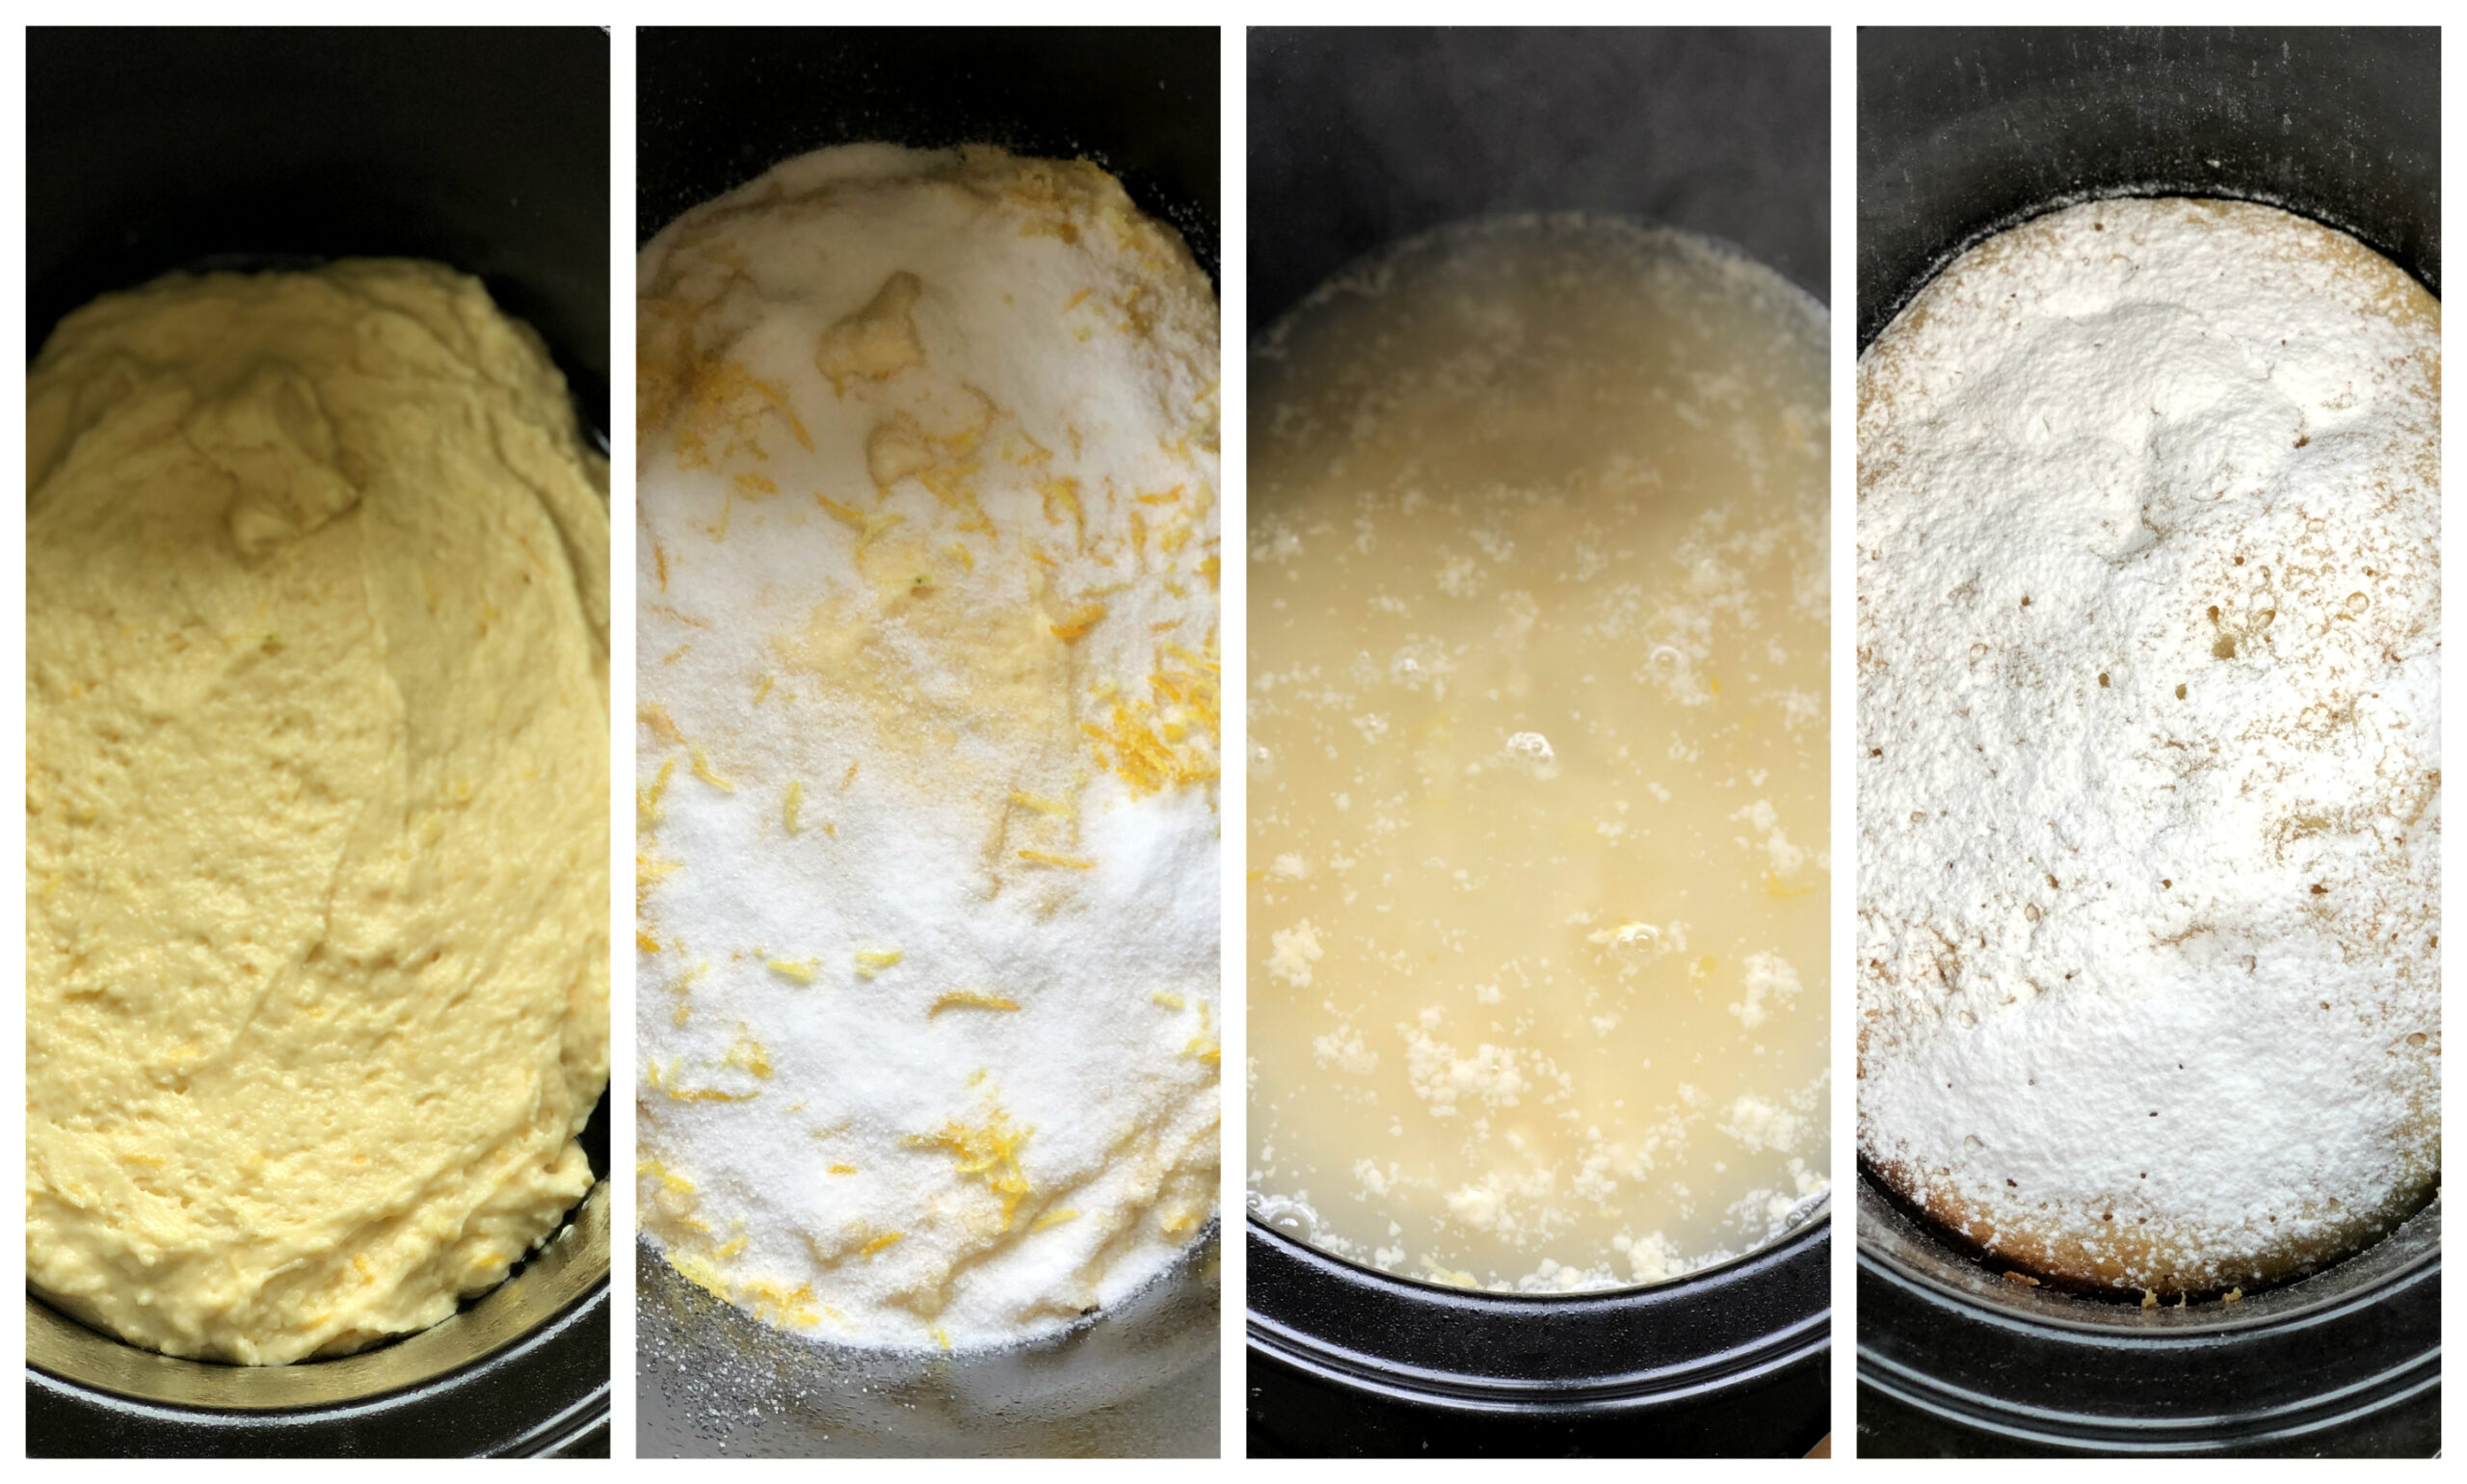 4 steps for how to make slow cooker self saucing pudding